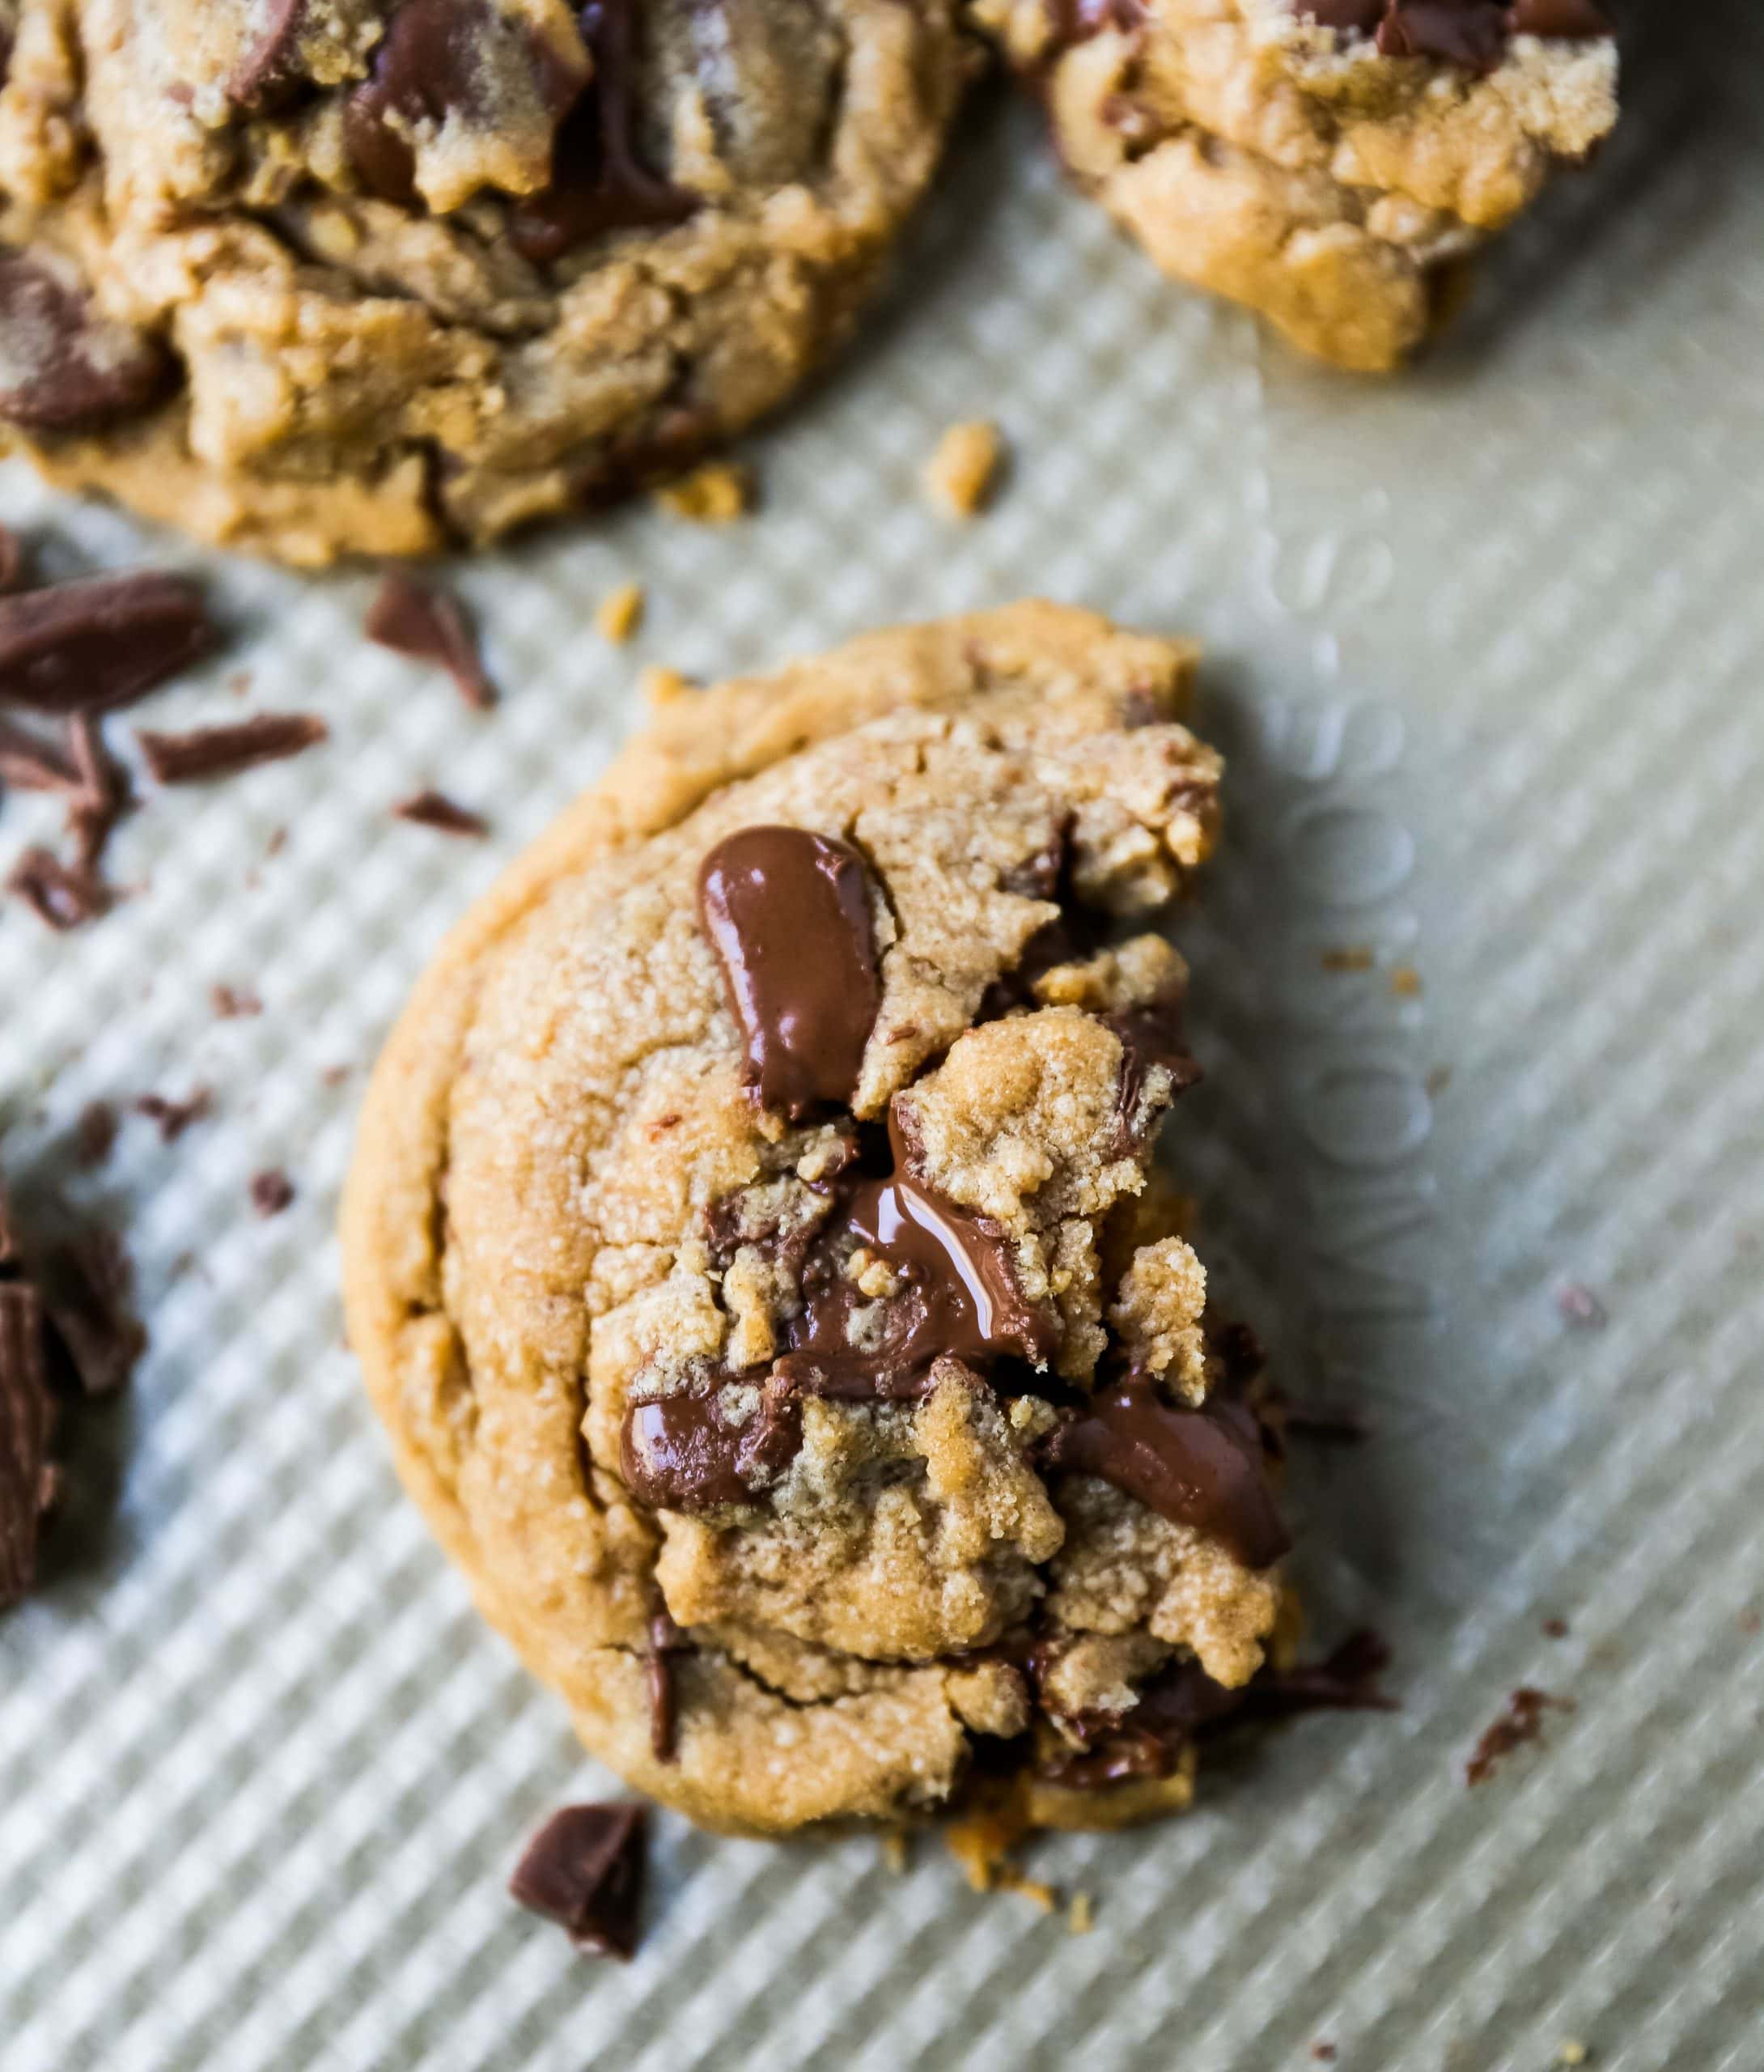 Peanut Butter Chocolate Chip Cookies Soft chewy peanut butter cookies with chocolate chunks. How to make the best peanut butter chocolate chip cookies! www.modernhoney.com #peanutbutter #peanutbuttercookies #peanutbutterchocolatechipcookies #christmascookies